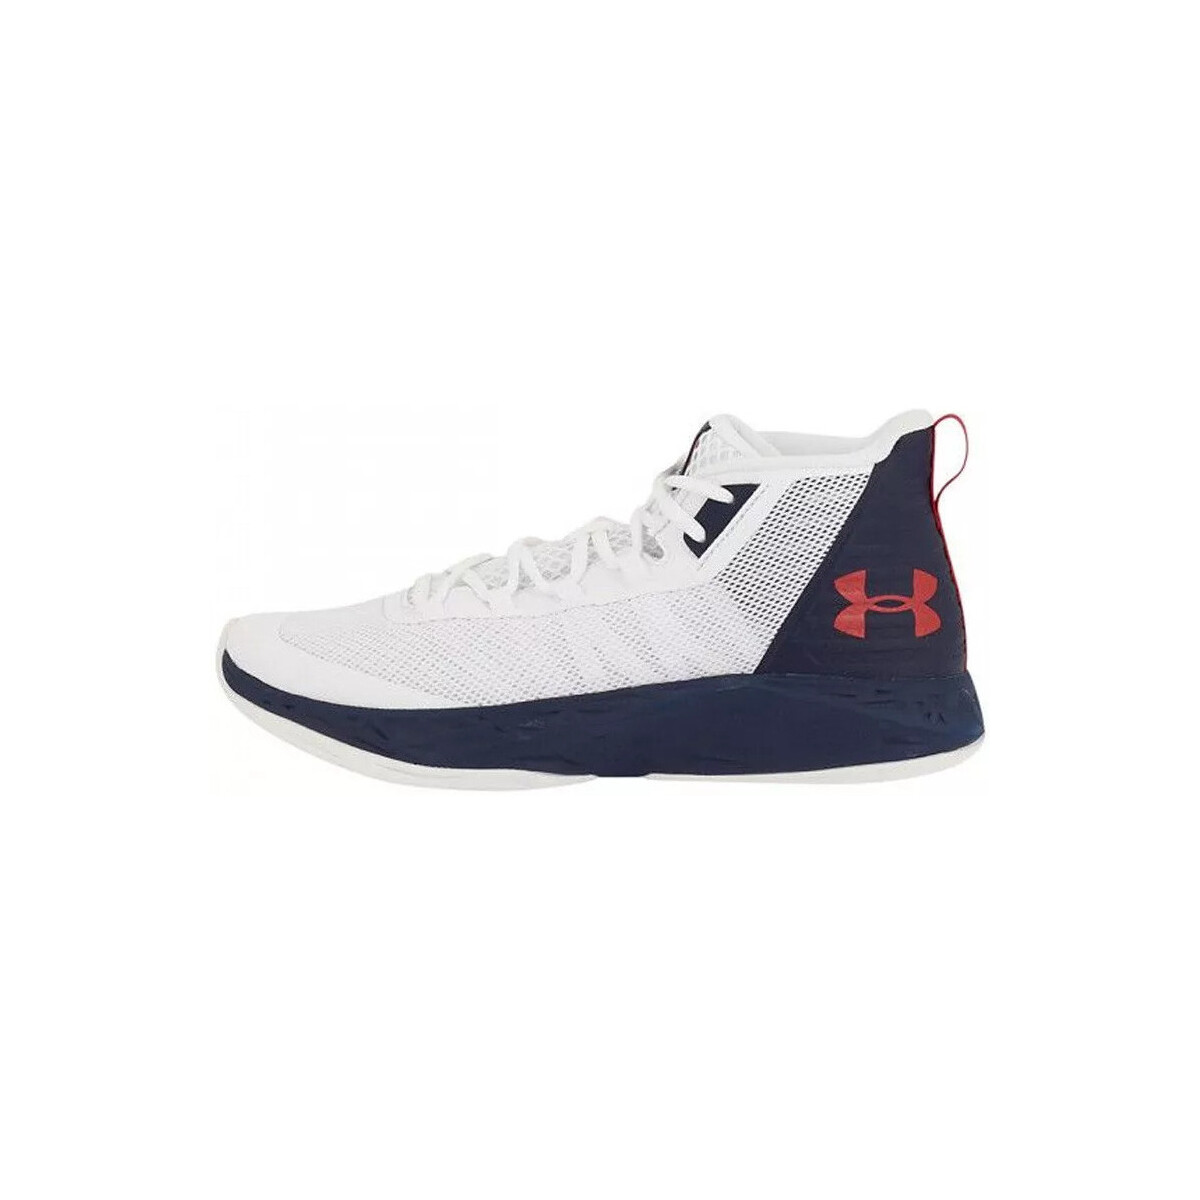 Chaussures Homme under armour ua hg shorty print ppl JET MID Blanc